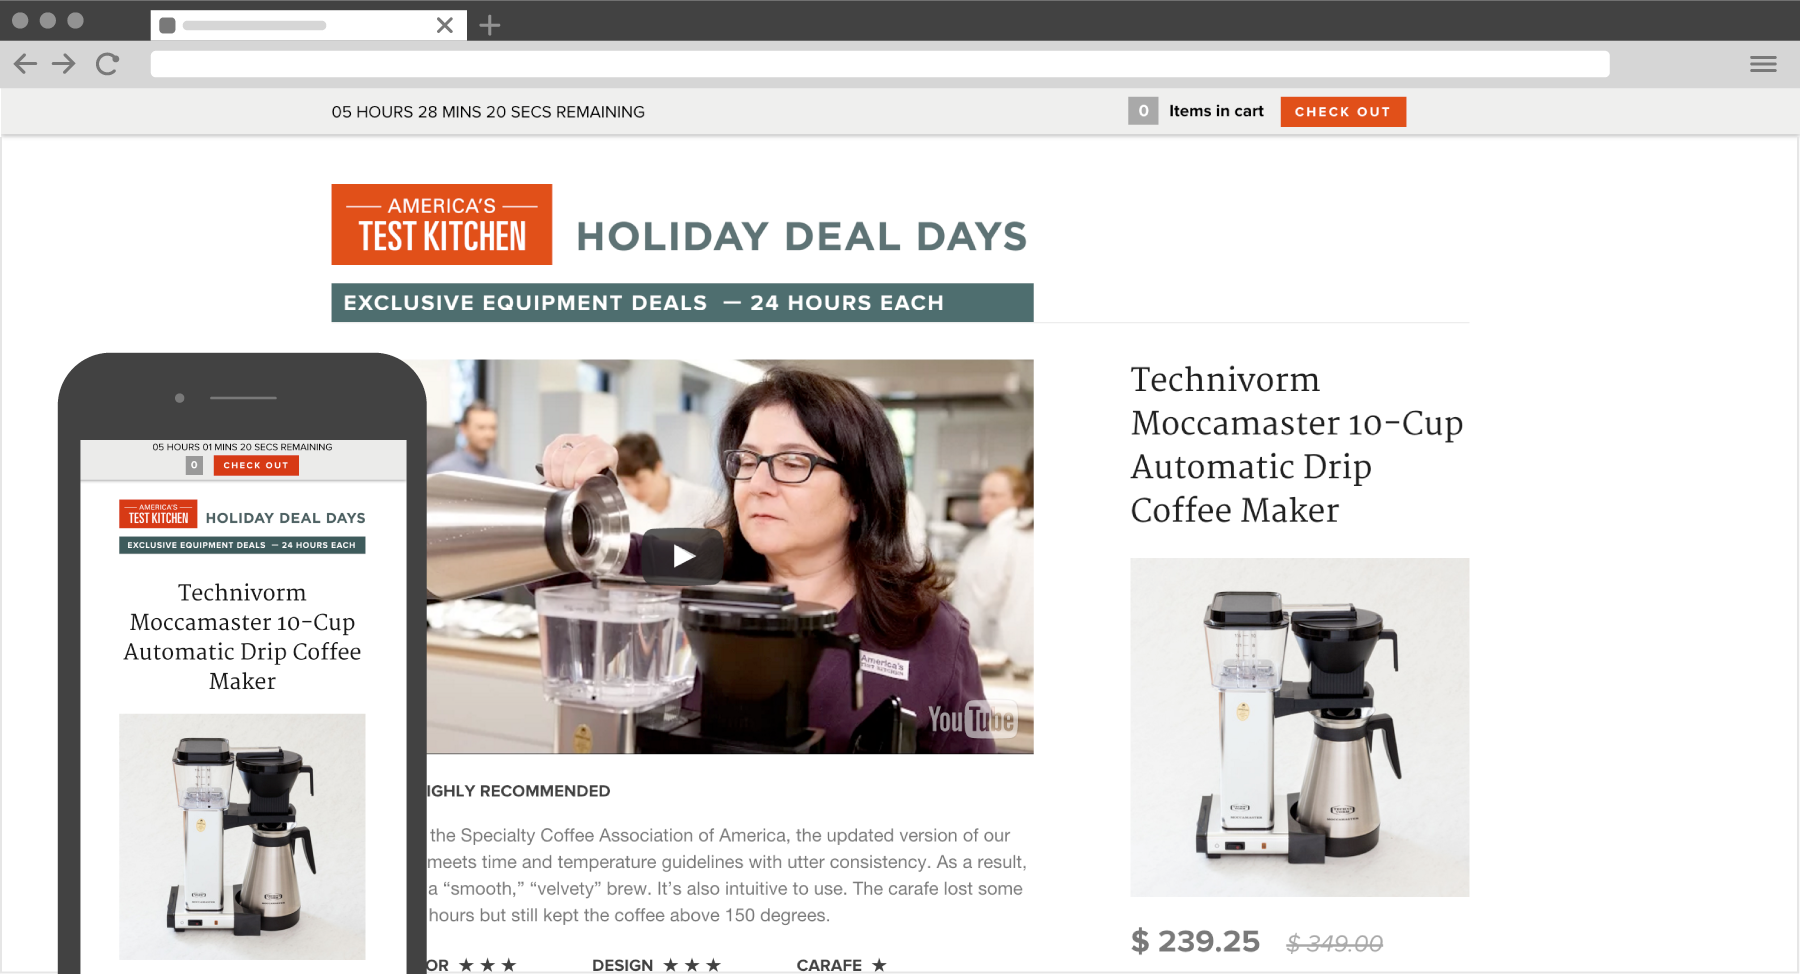 ATK Holiday Deal Days microsite